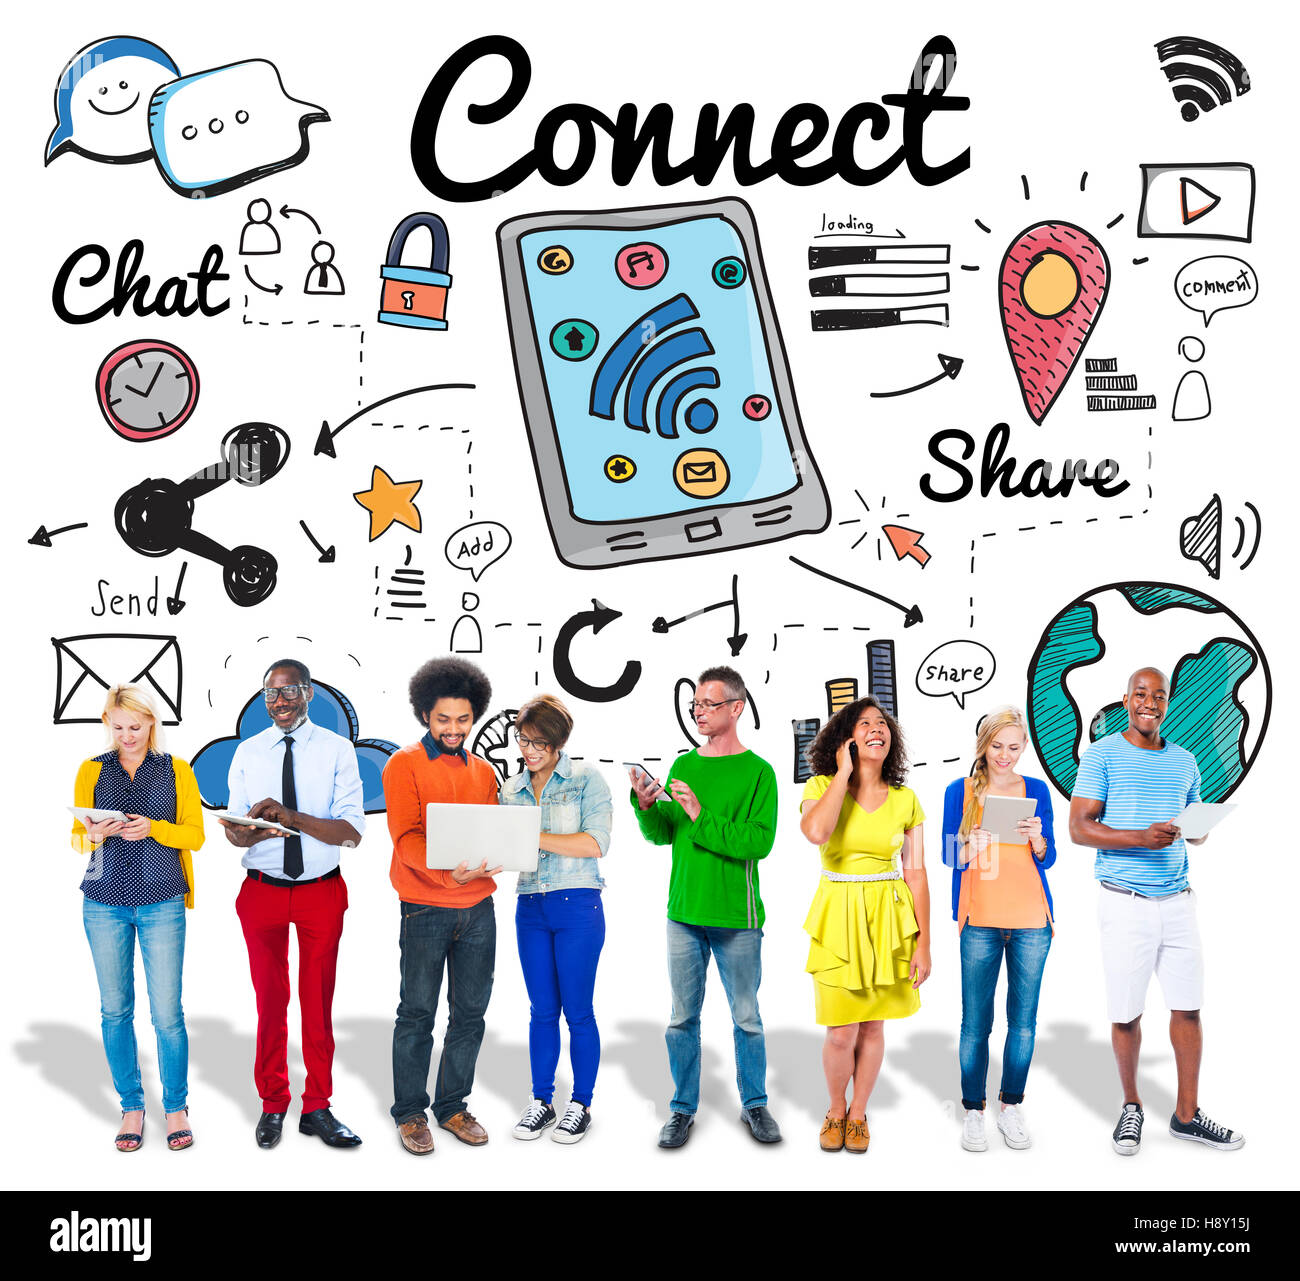 Connect Social Media Social Networking Concept Stock Photo